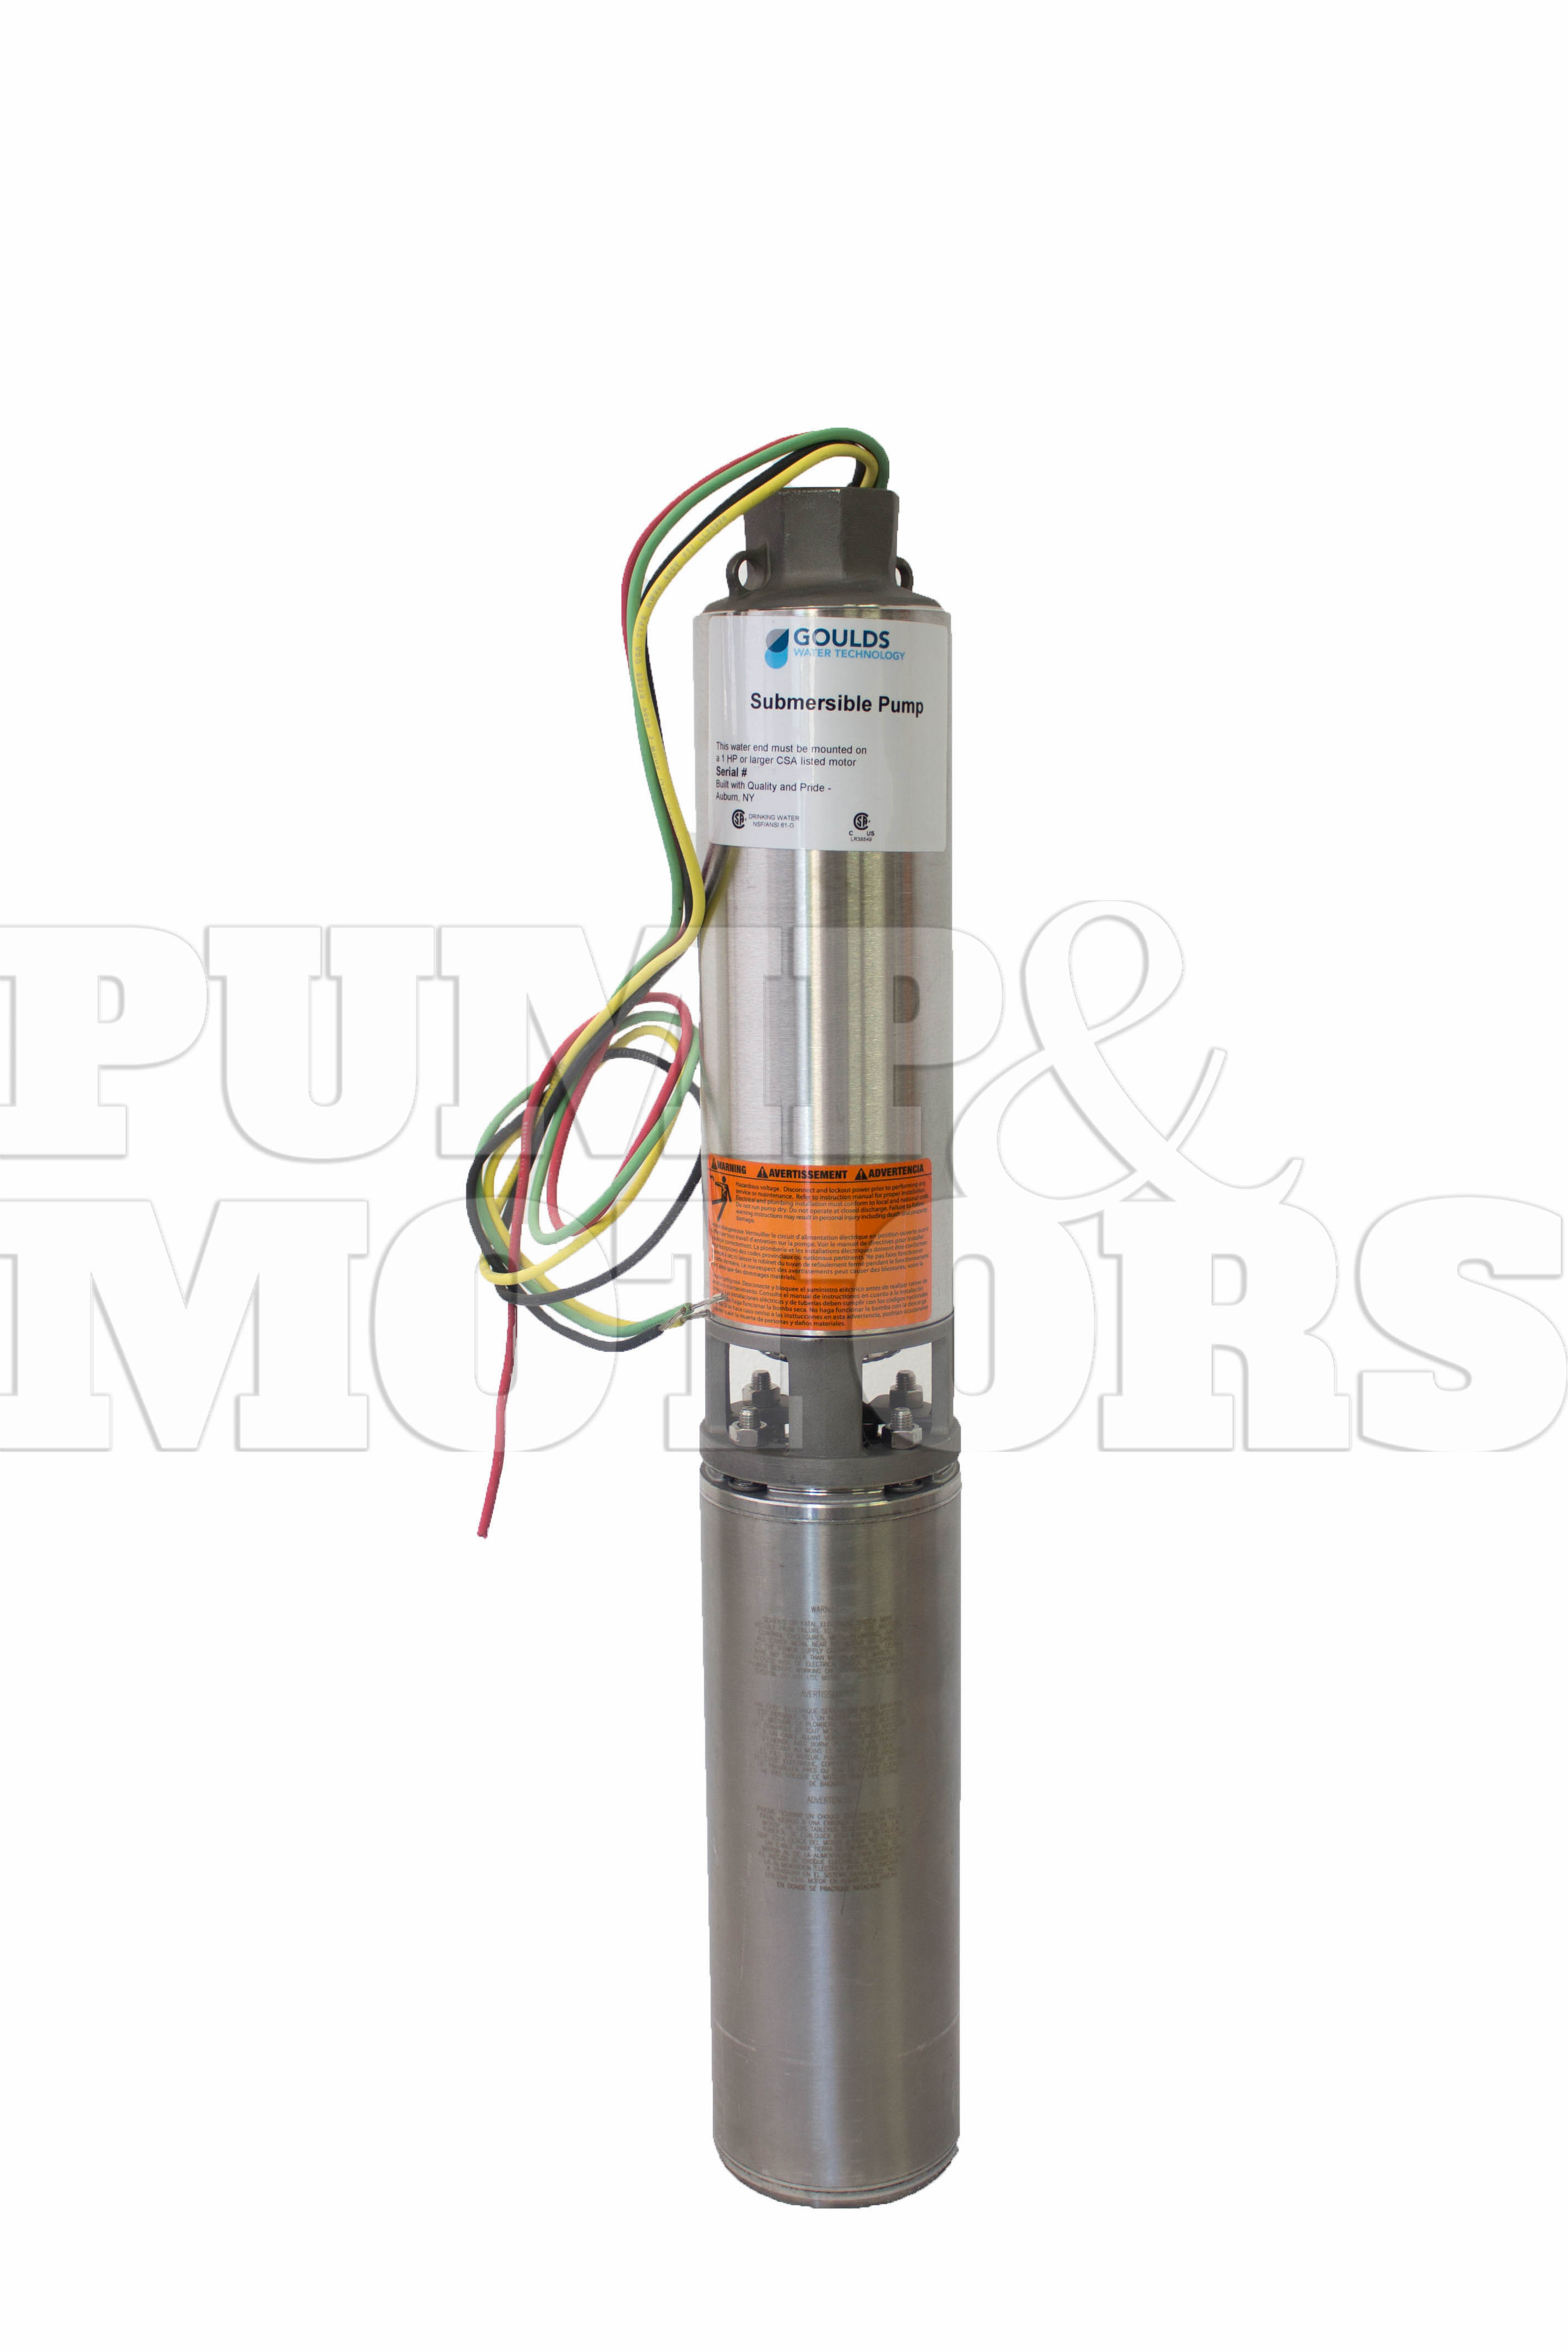 Goulds 5GS05411CL 1/2HP 115V Submersible Water Well Pump 5GPM